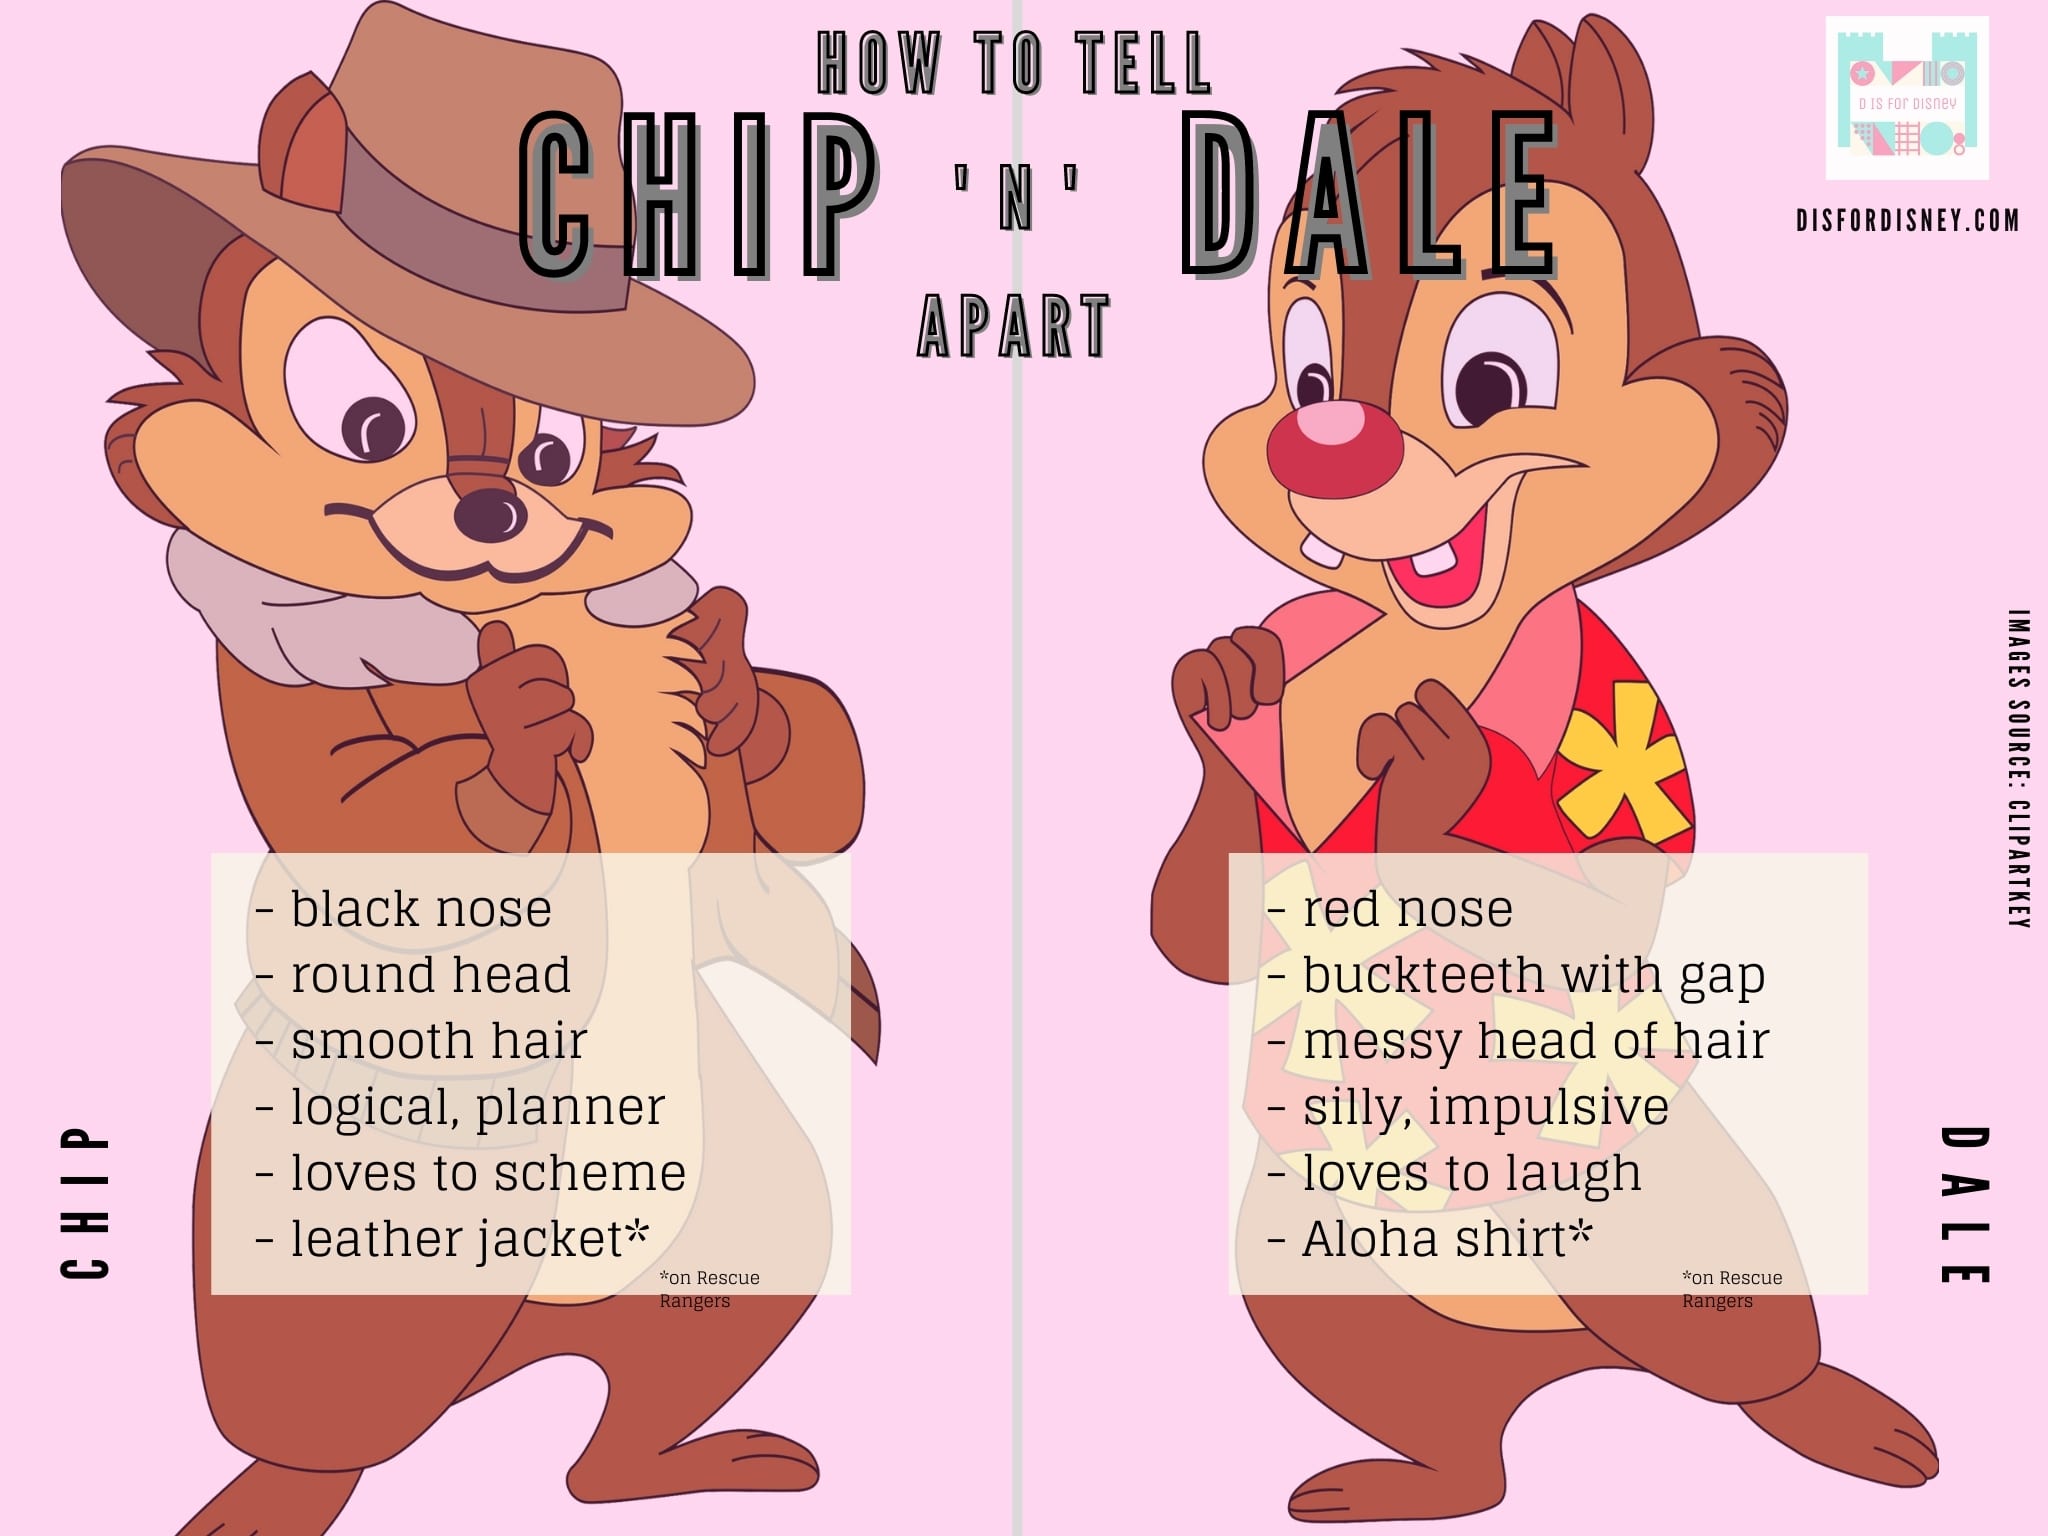 How To Tell Chip And Dale Apart